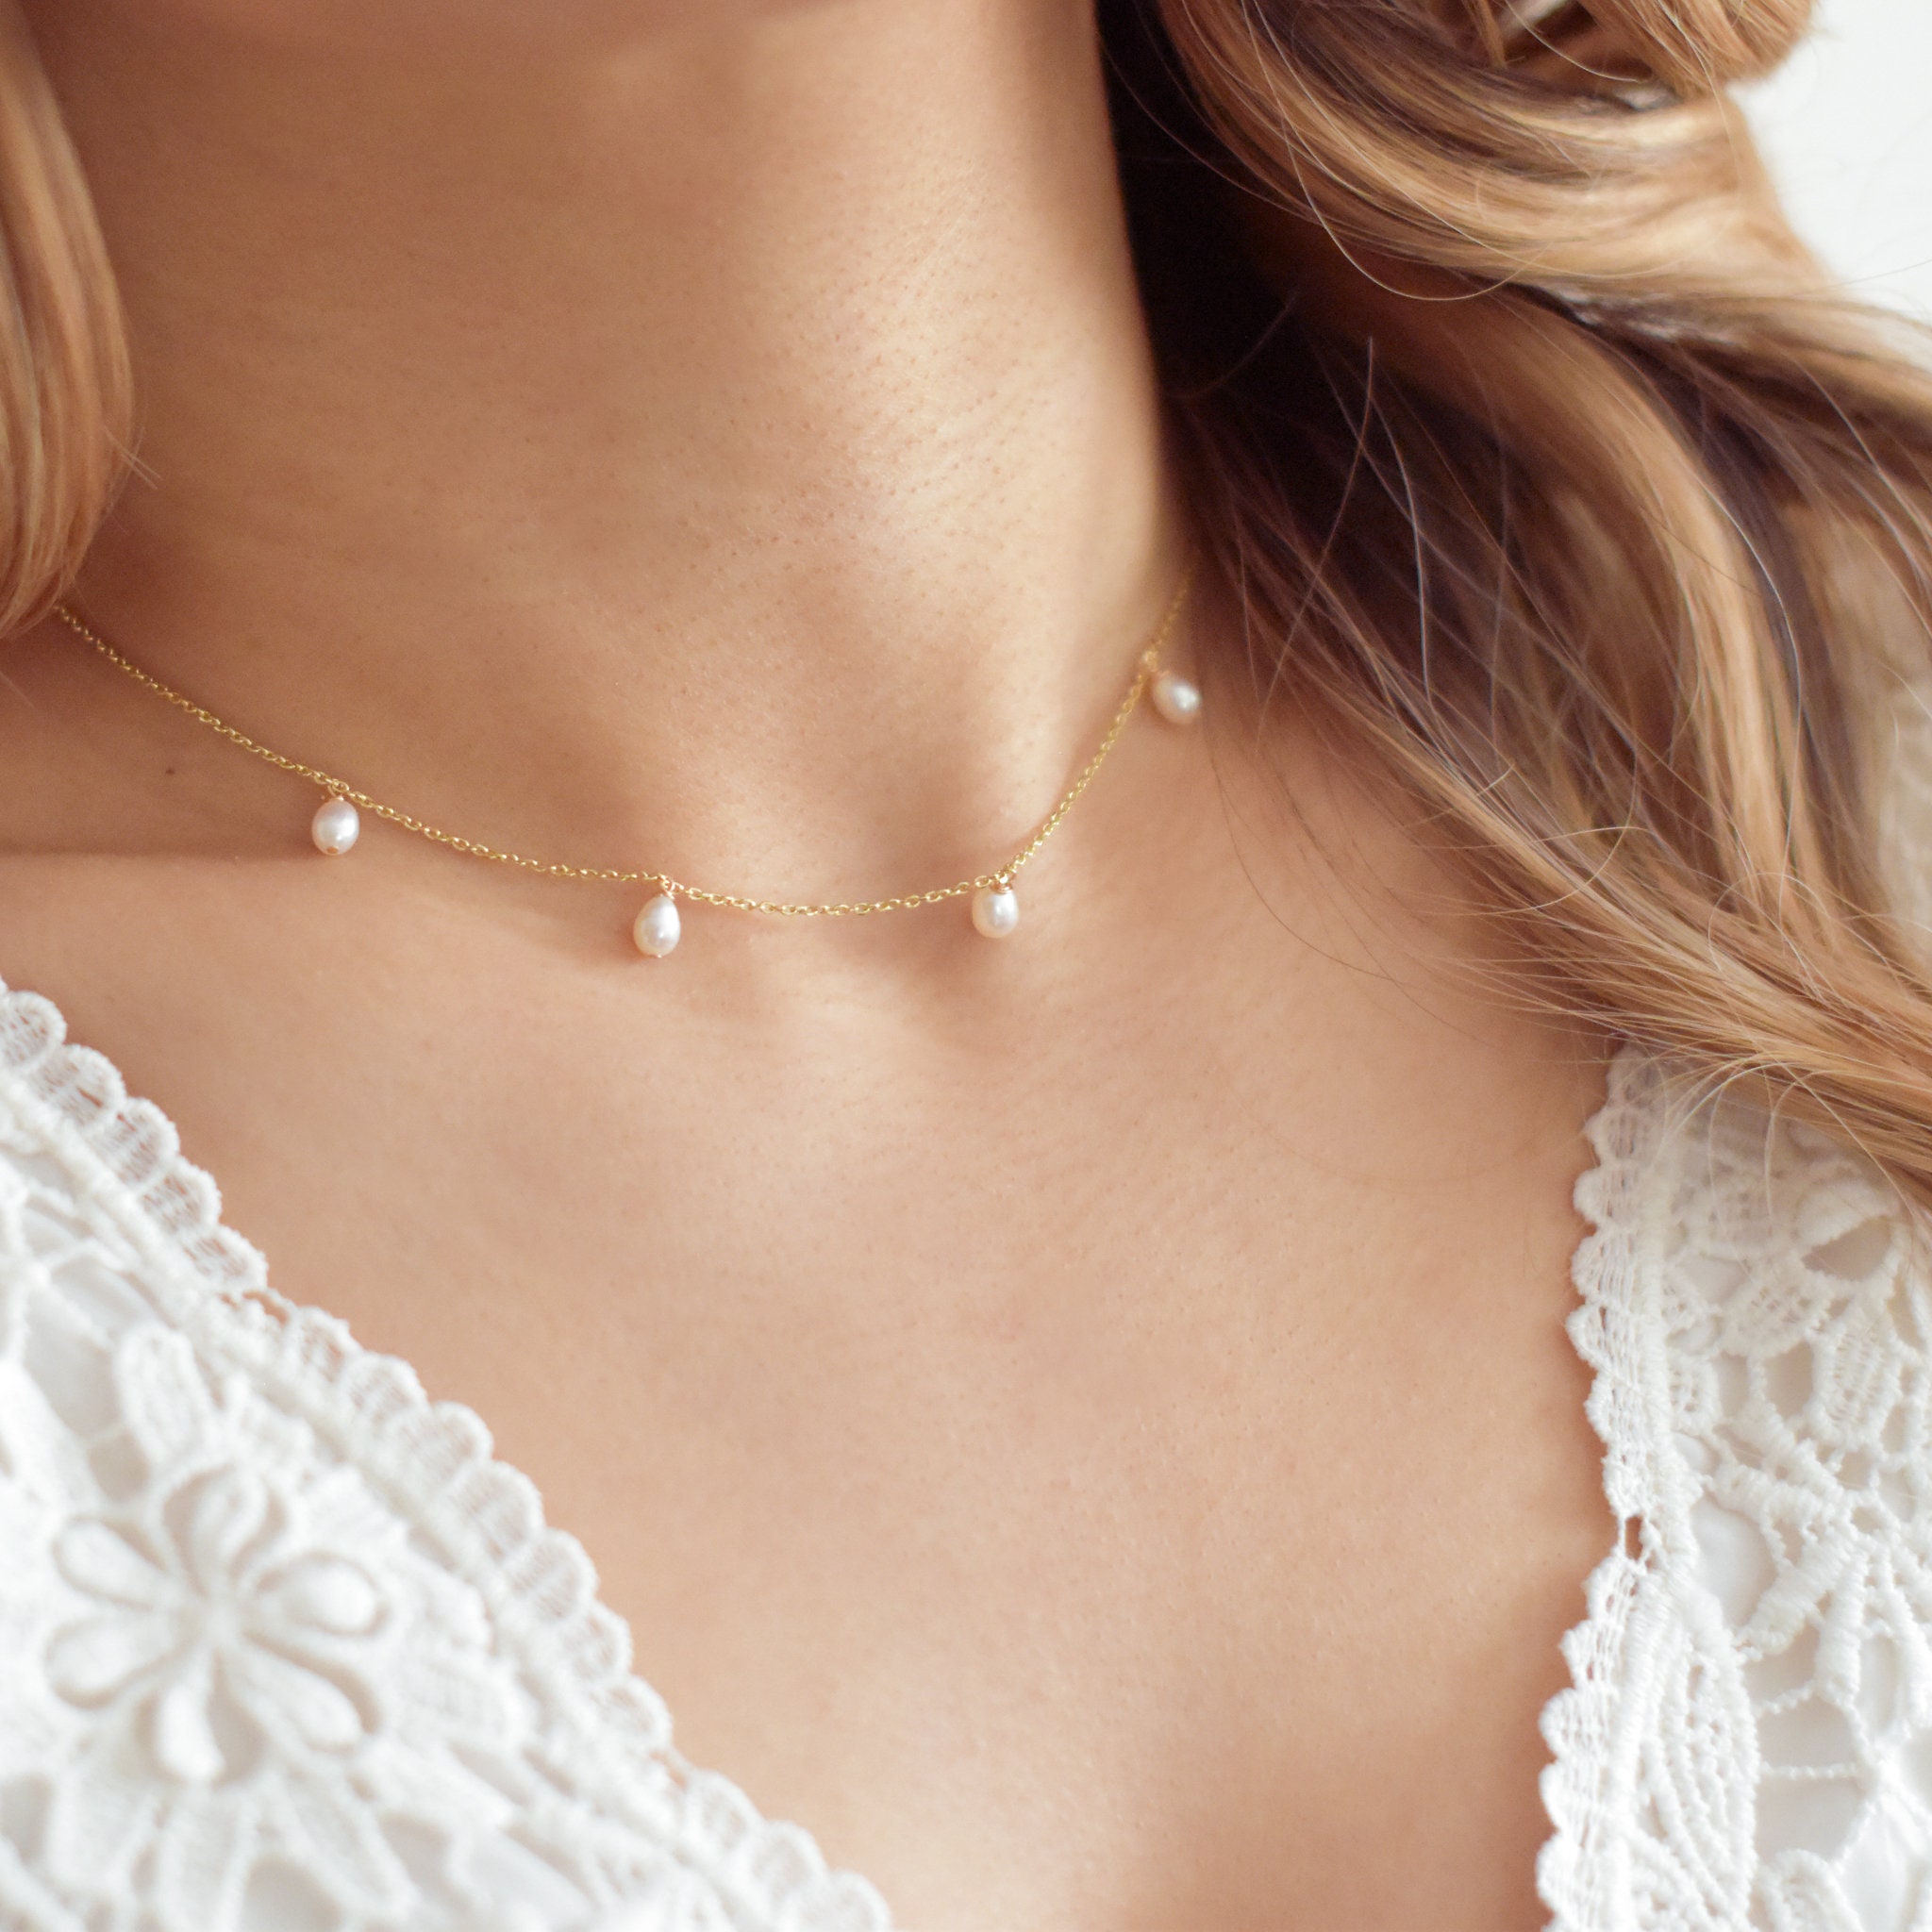 The Pearl Choker - This Summer's Hottest Trend